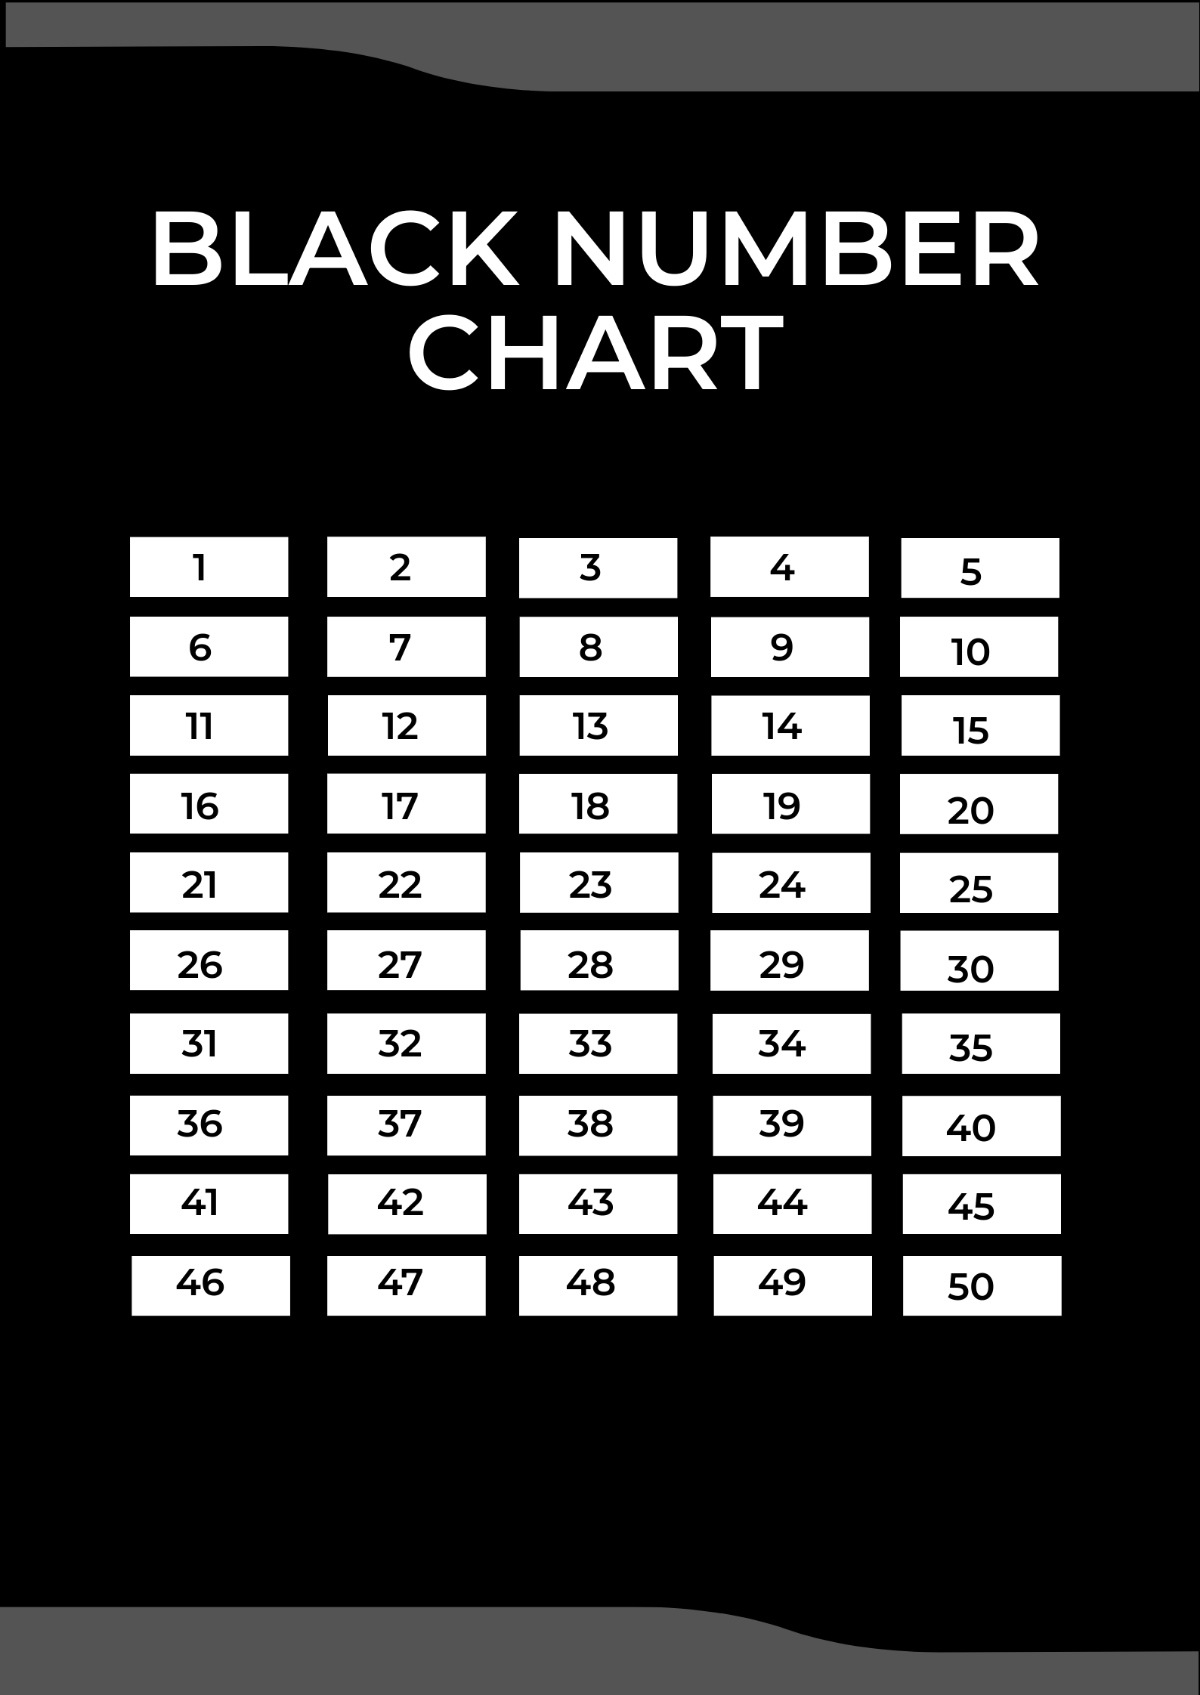 Black Number Chart Template